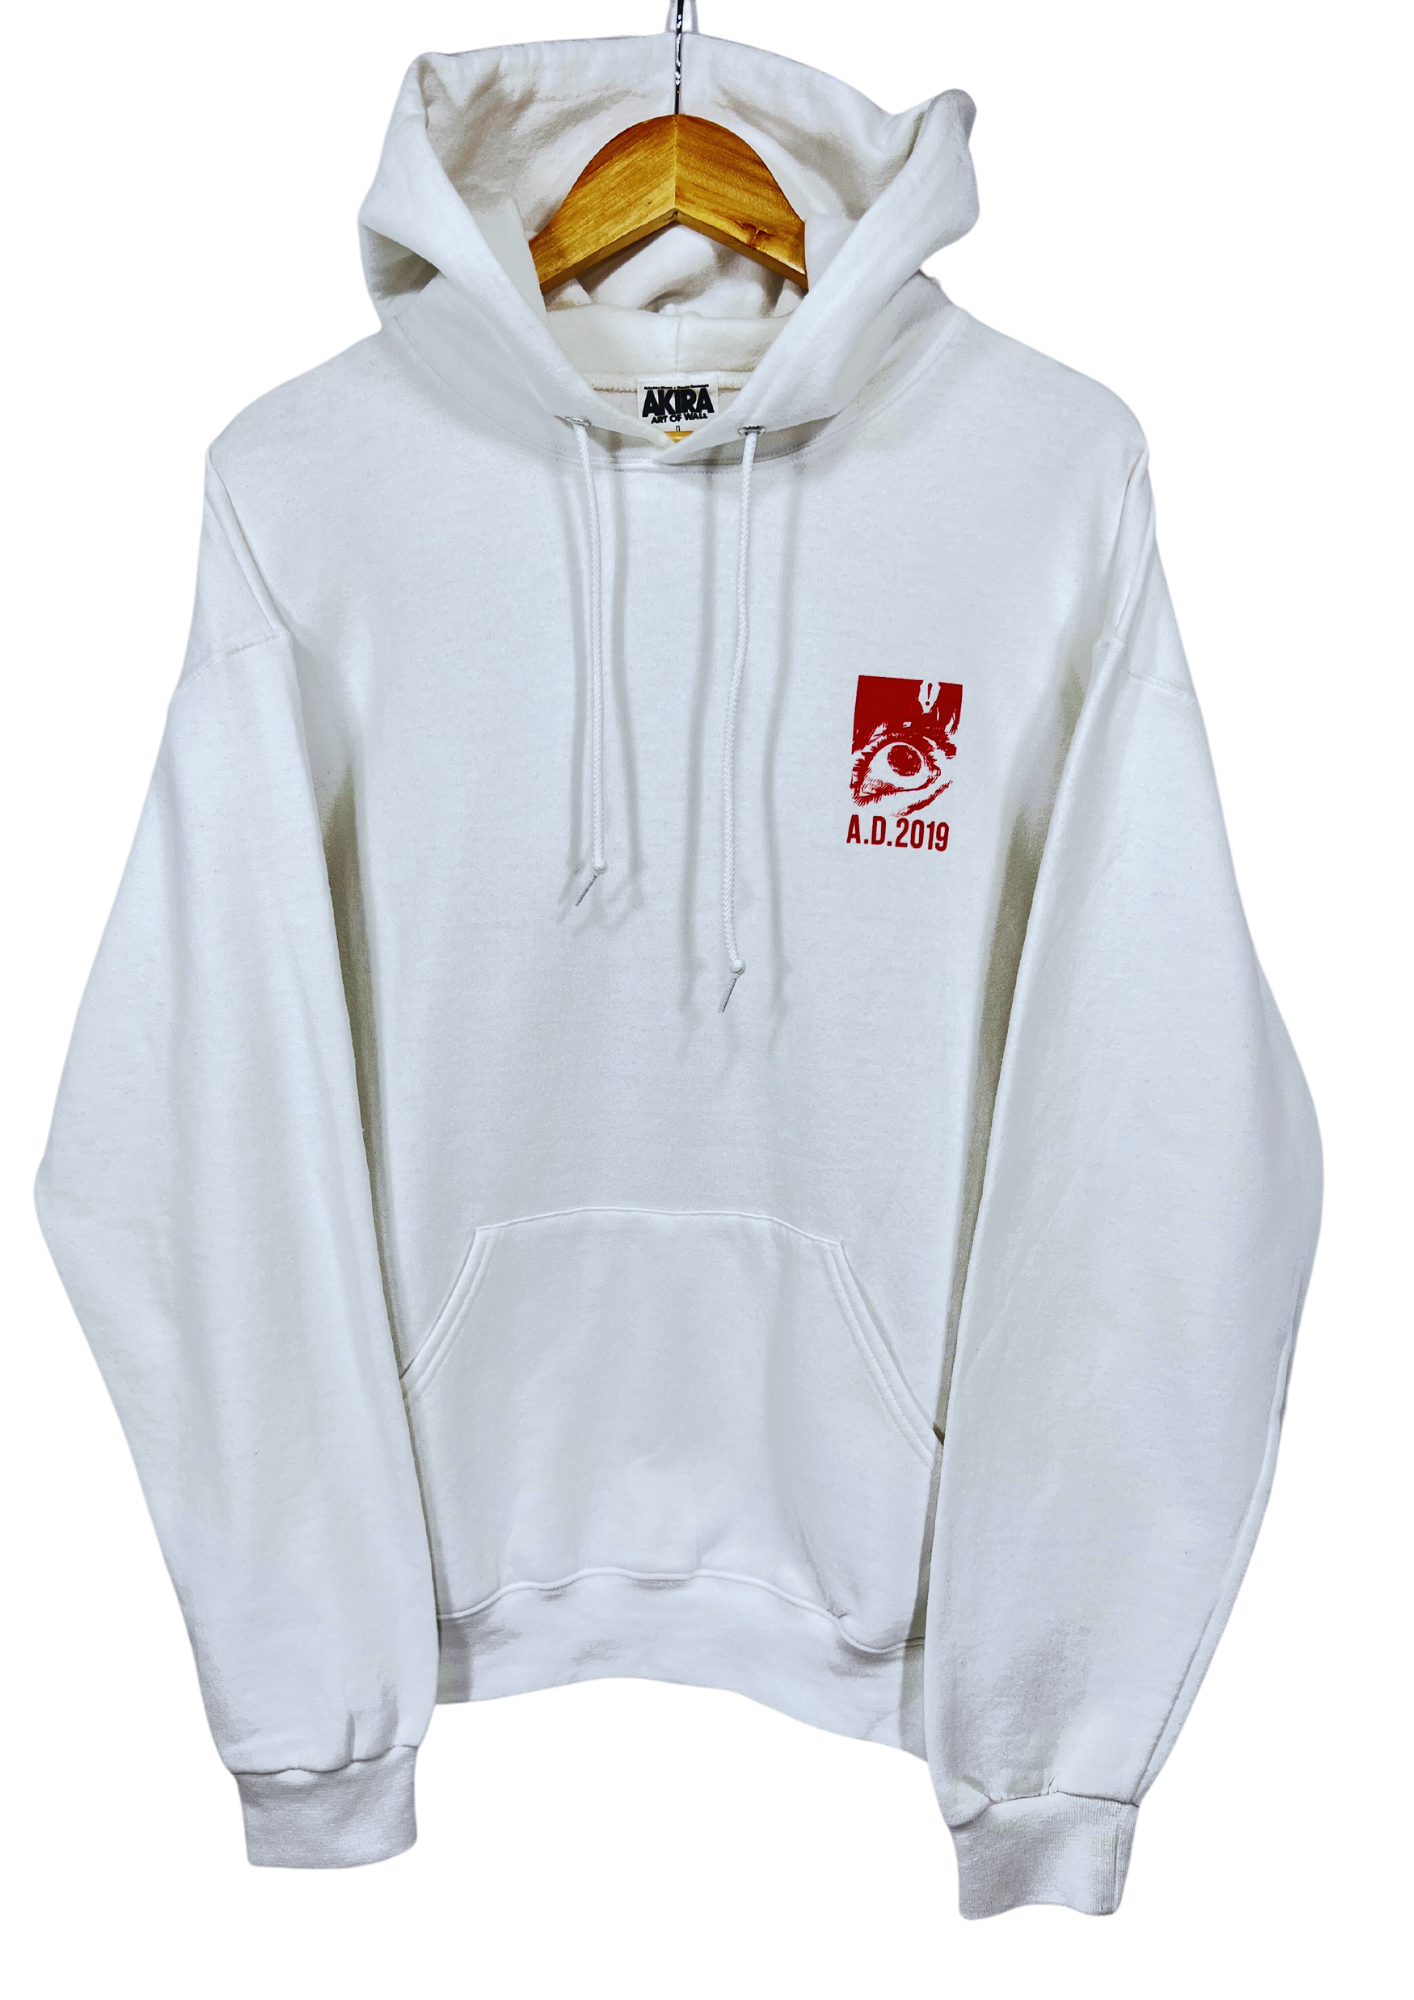 AKIRA x ART OF WALL Exhibition Limited Hoodie